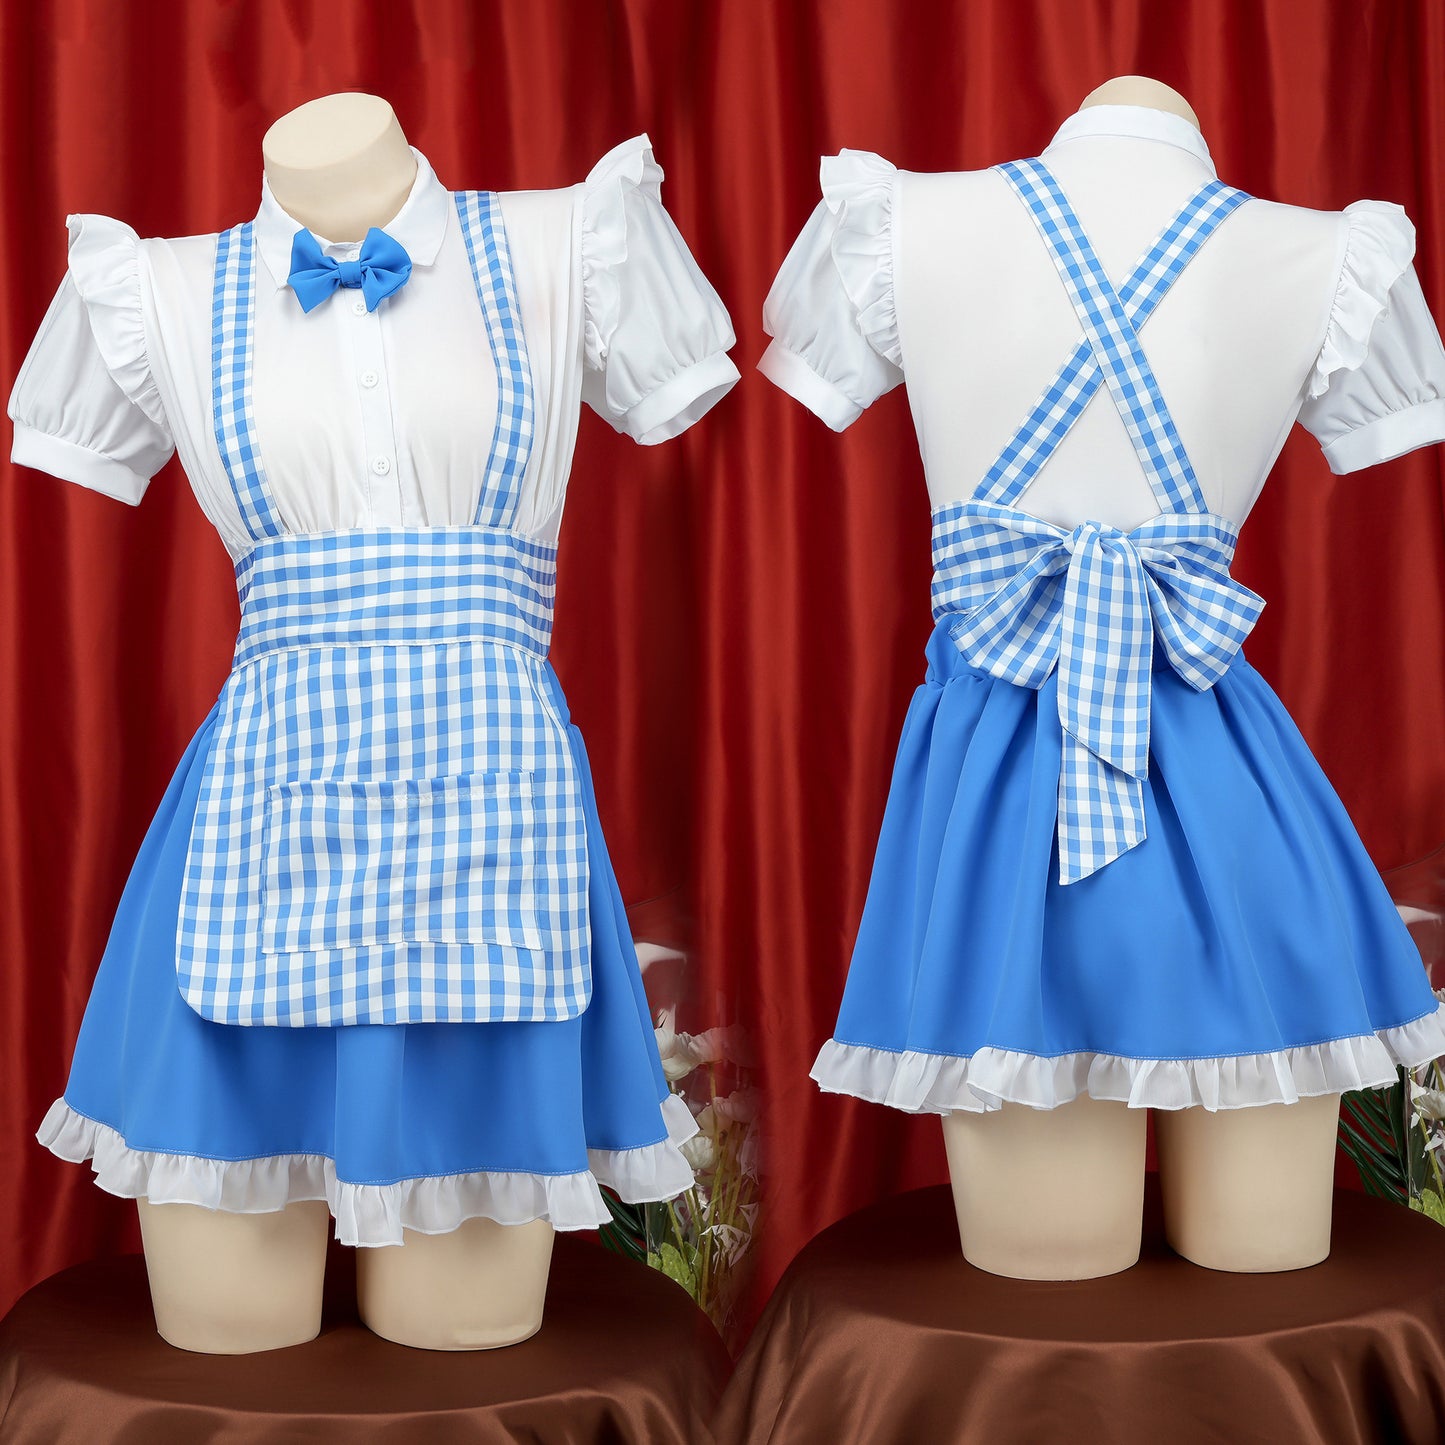 Blue And White Maid Dress Lingerie Front And Back - Femboy Fashion